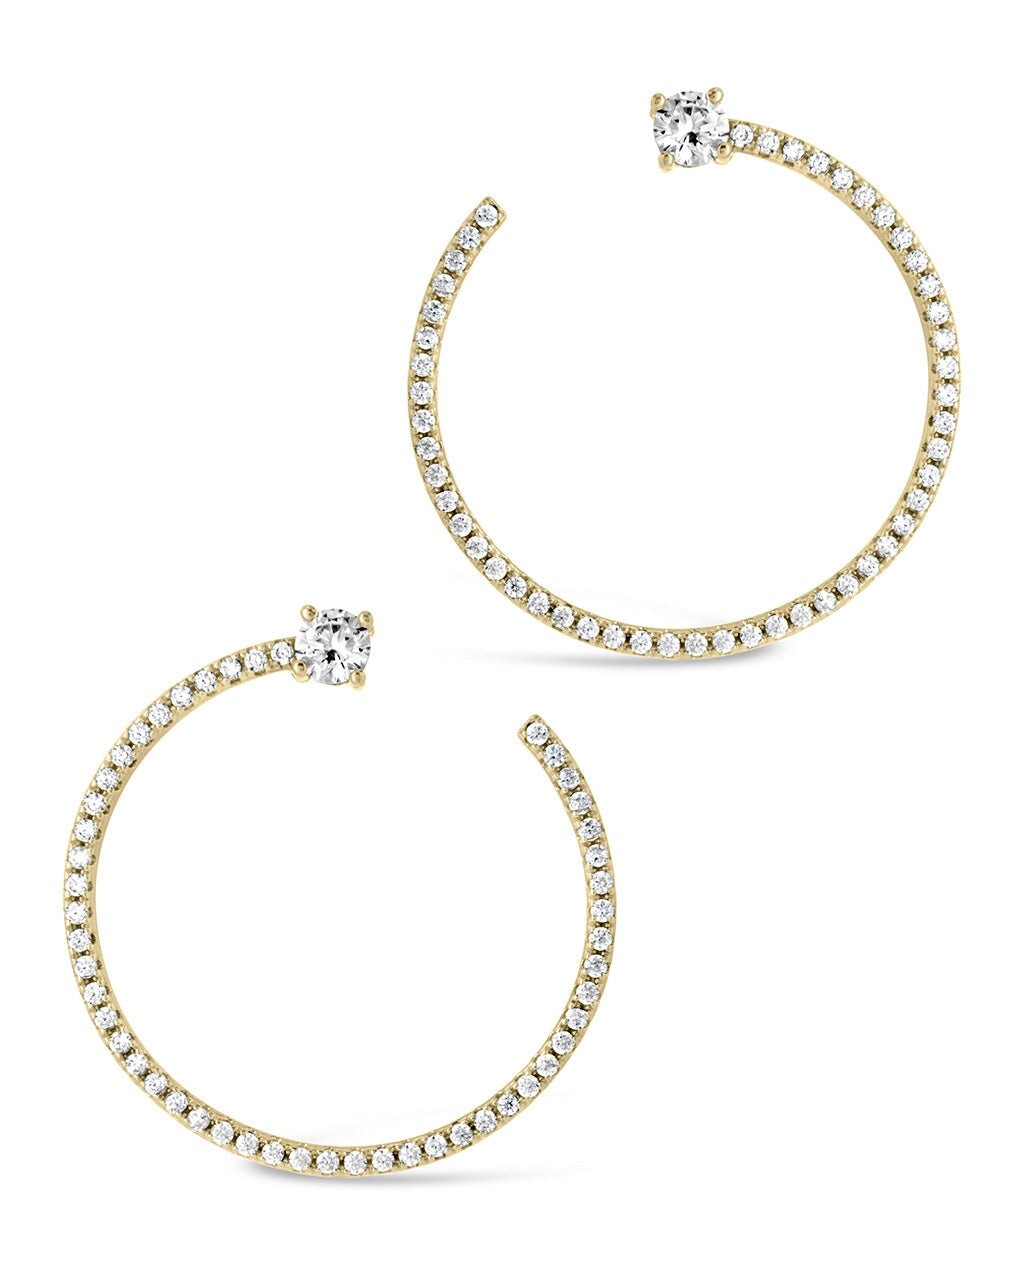 Cindy Circle Studs Earring Sterling Forever 